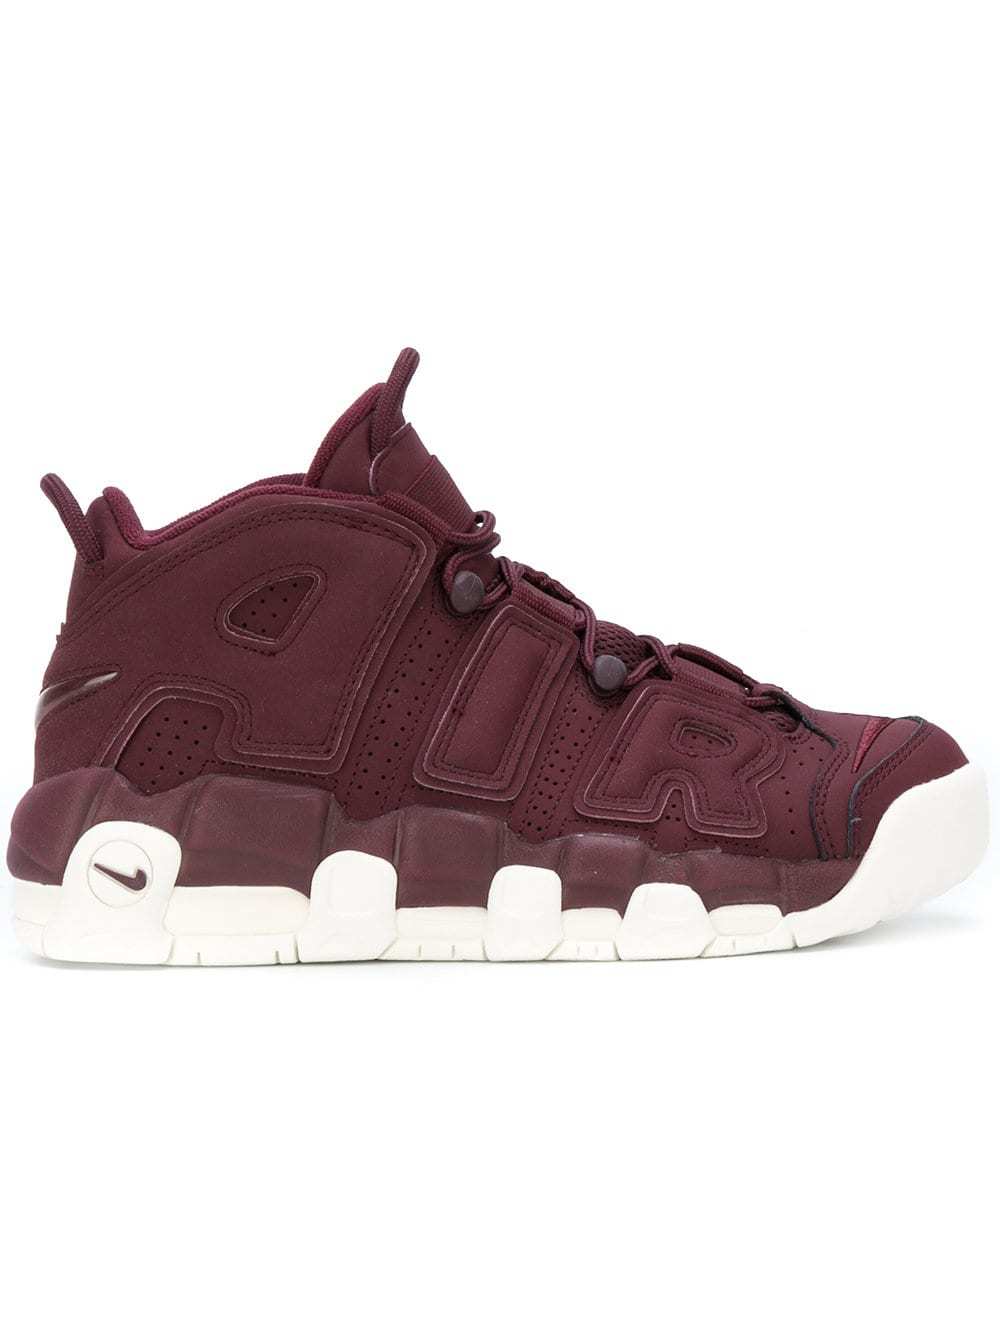 Nike More Uptempo 96 Sneakers, $280 